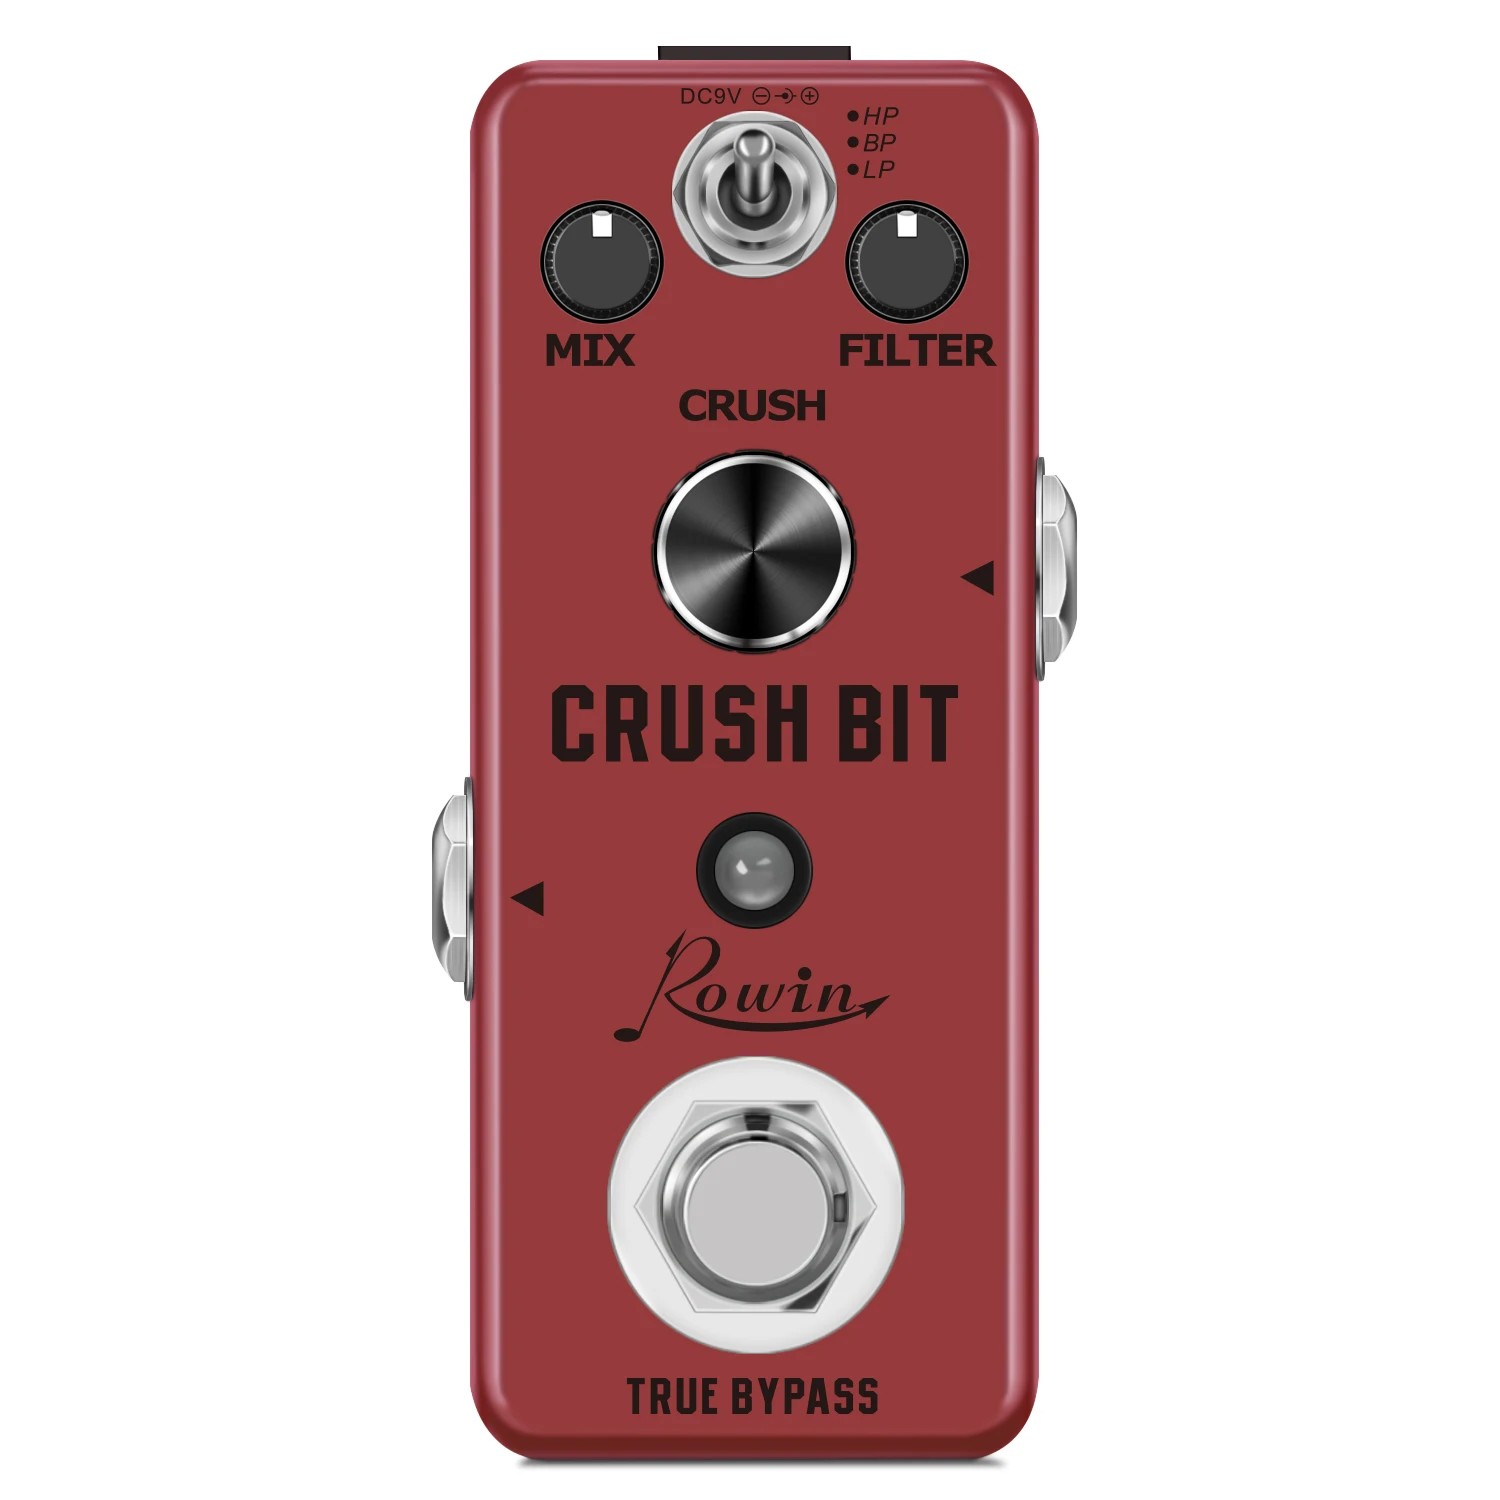 Rowin LEF-3810 Crush bit guitar pedal effector This store has closed.Please buy at my new store,keytarsmusic.aliexpress.com. enlarge